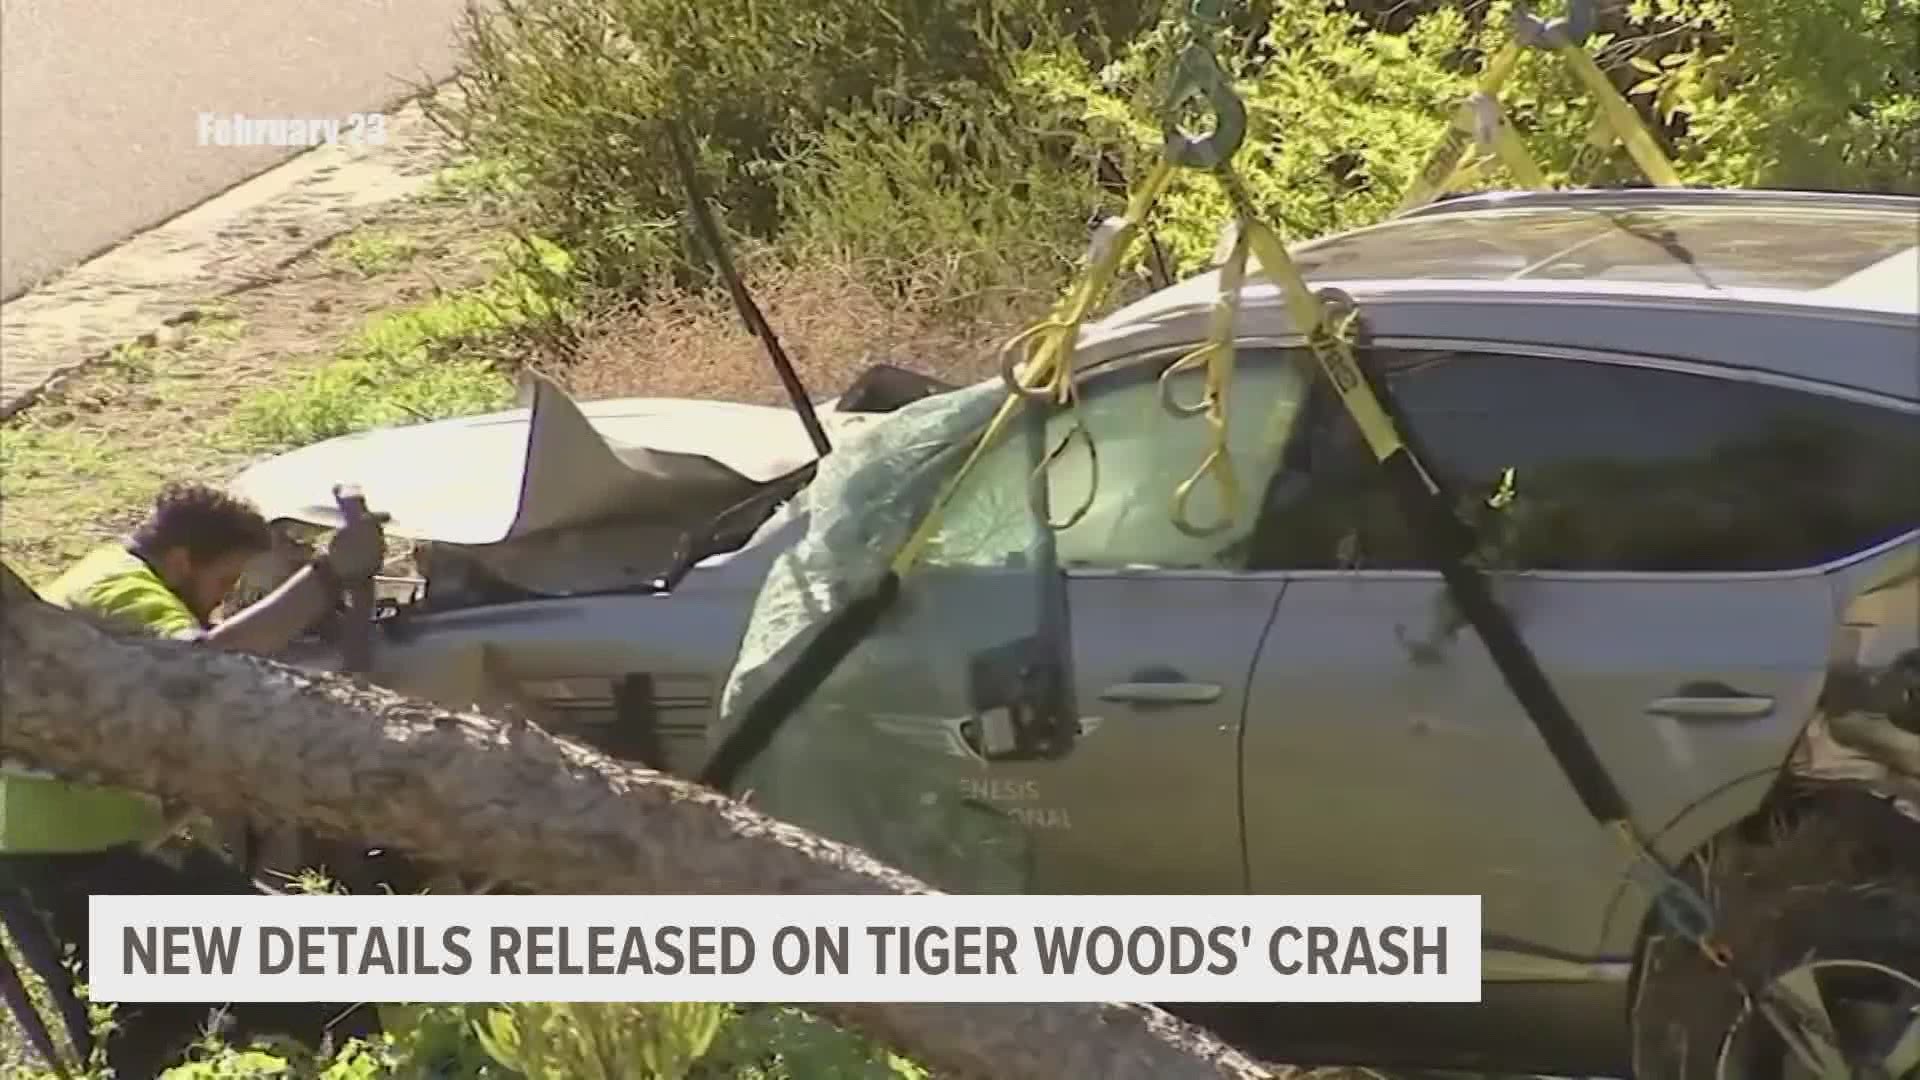 The Feb. 23 wreck left the golf superstar seriously injured. Sheriff Alex Villanueva blamed the crash solely on excessive speed and Woods’ loss of control.